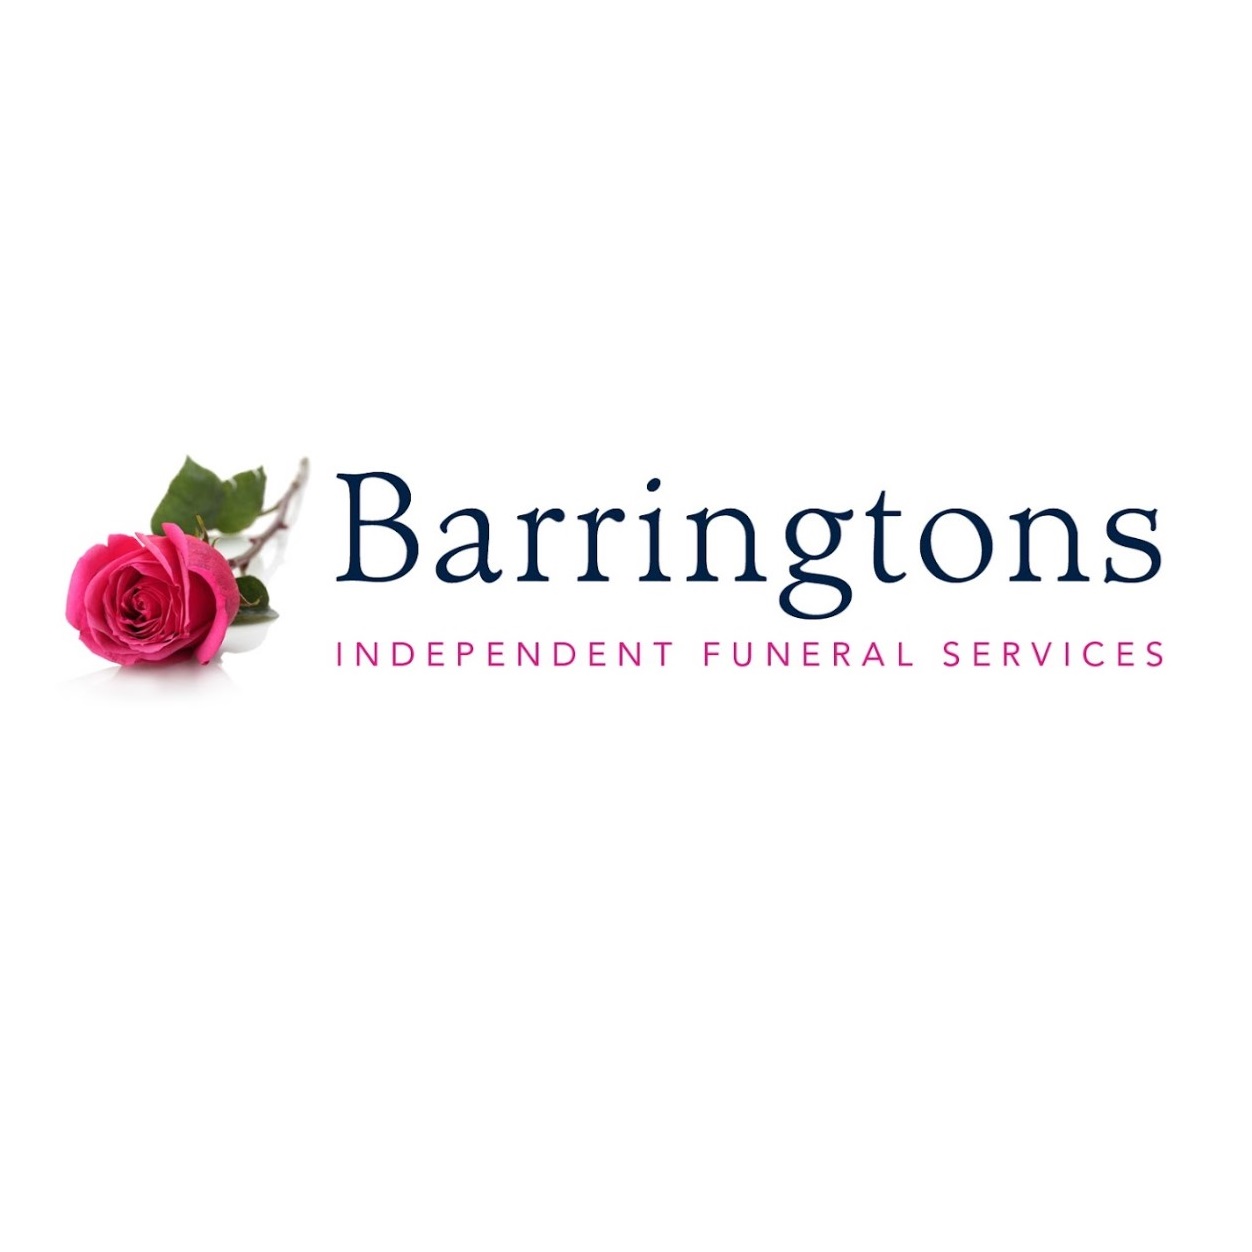 Barringtons Independent Funeral Services | 28 Crosby Rd N, Waterloo, Liverpool L22 4QF, United Kingdom | Phone: 0151 928 1625